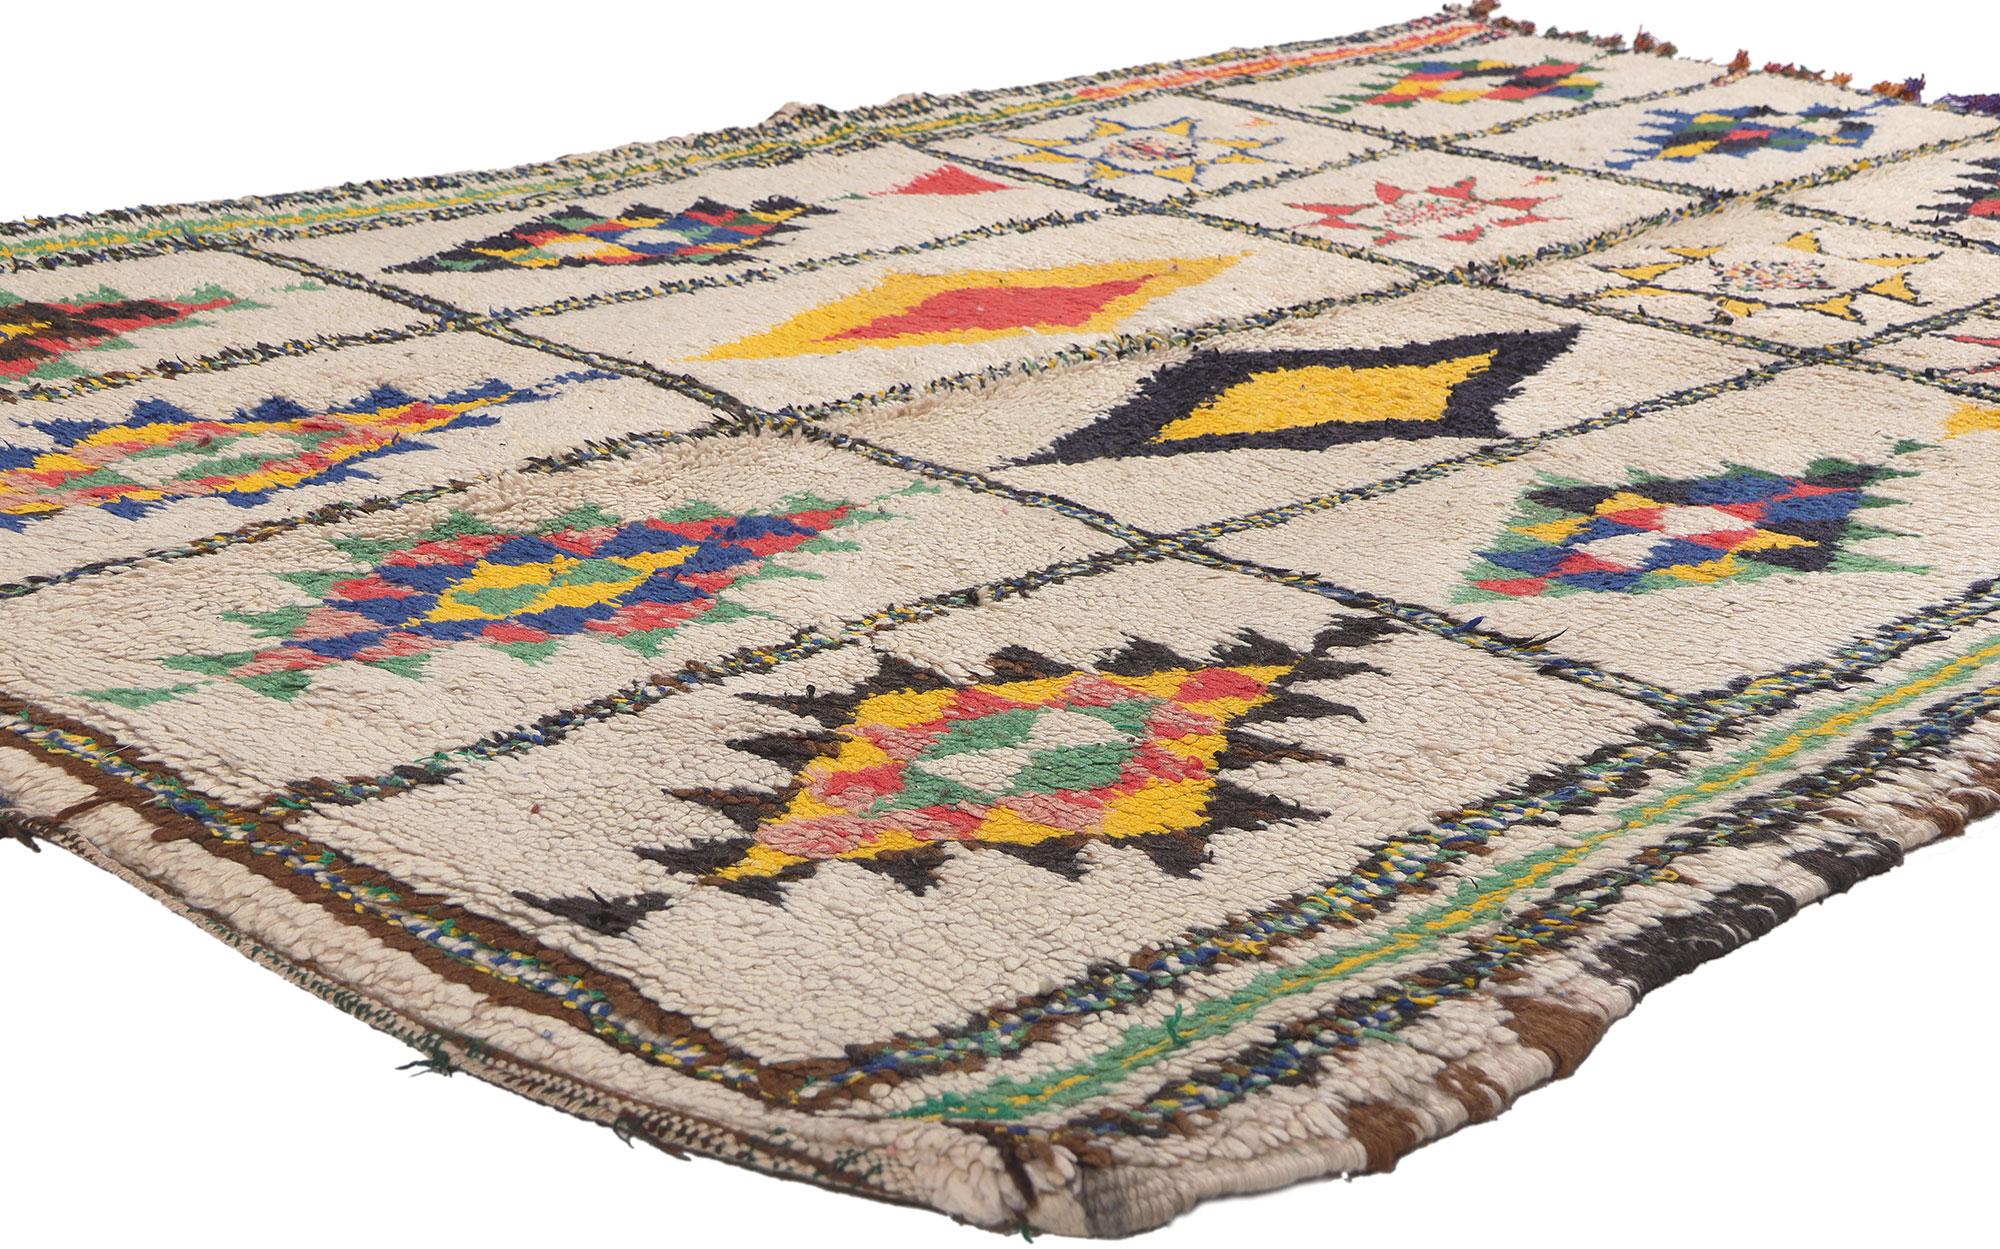 20286 Vintage Moroccan Azilal Rug, 05'01 x 07'05. Bohemian allure meets nomadic enchantment in this hand-knotted wool vintage Berber Moroccan Azilal rug. The captivating compartmentalized design and lively colors woven into this piece seamlessly